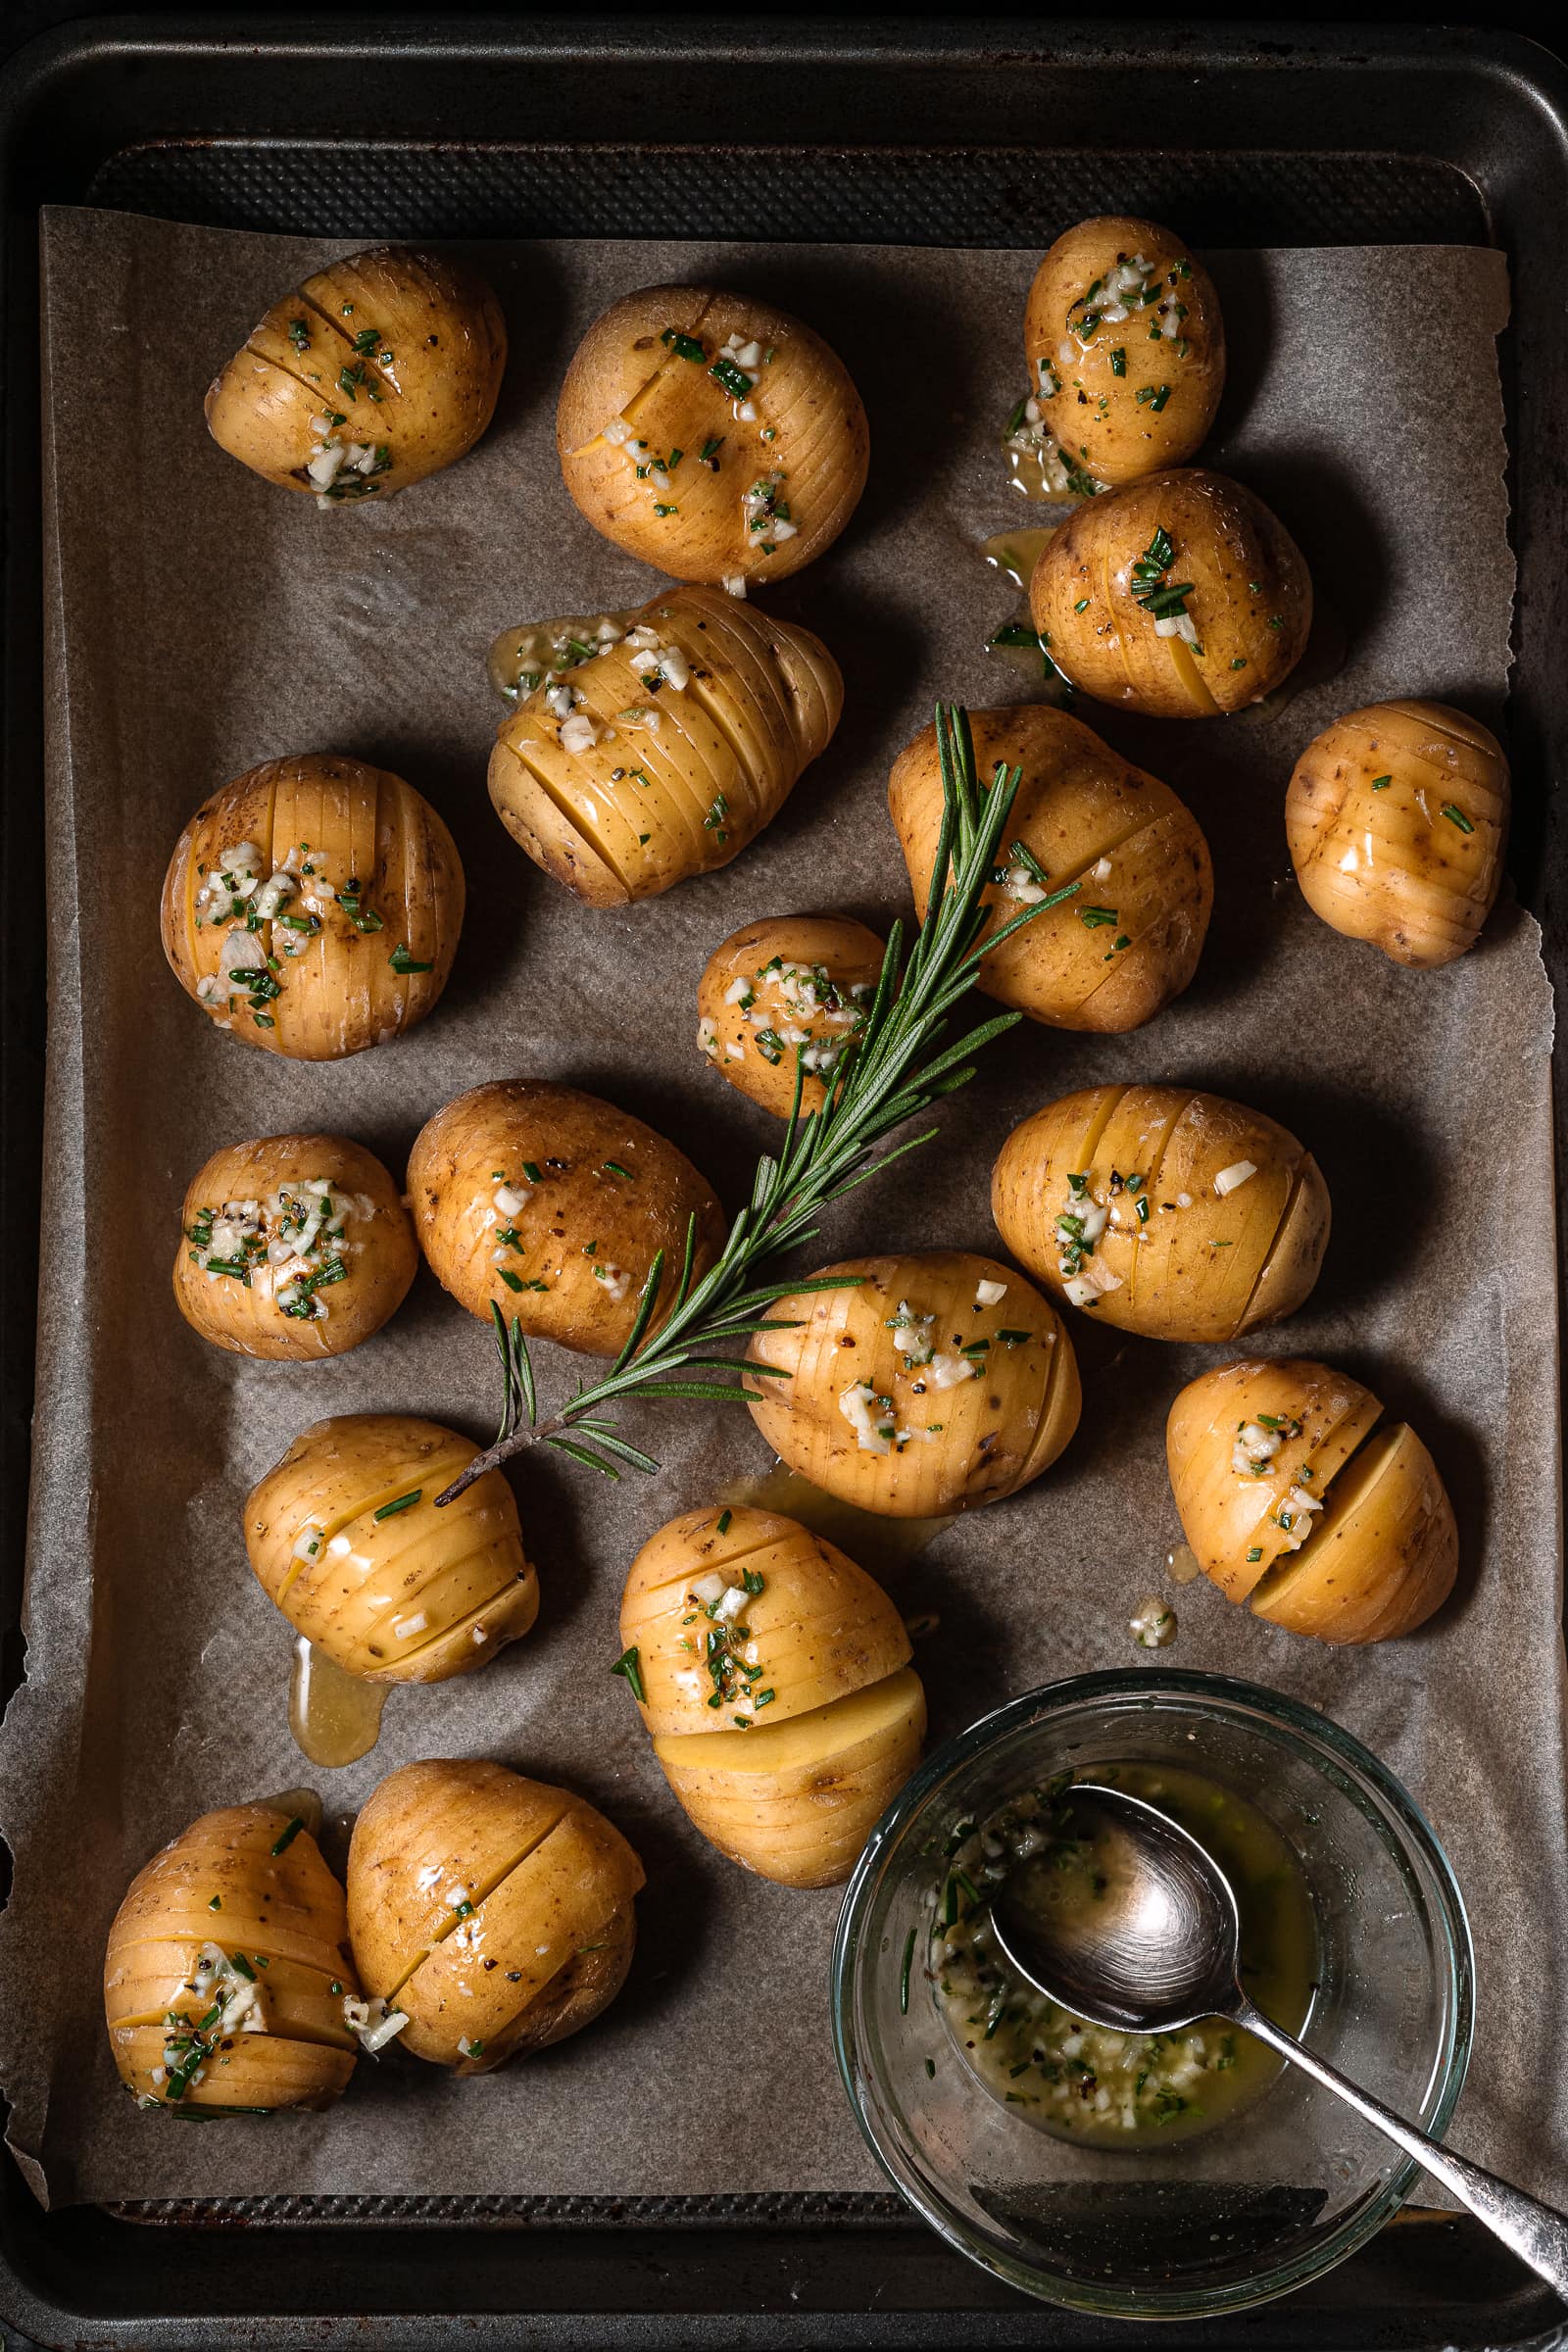 Raw potatoes on tray with garlic butter and rosemary.